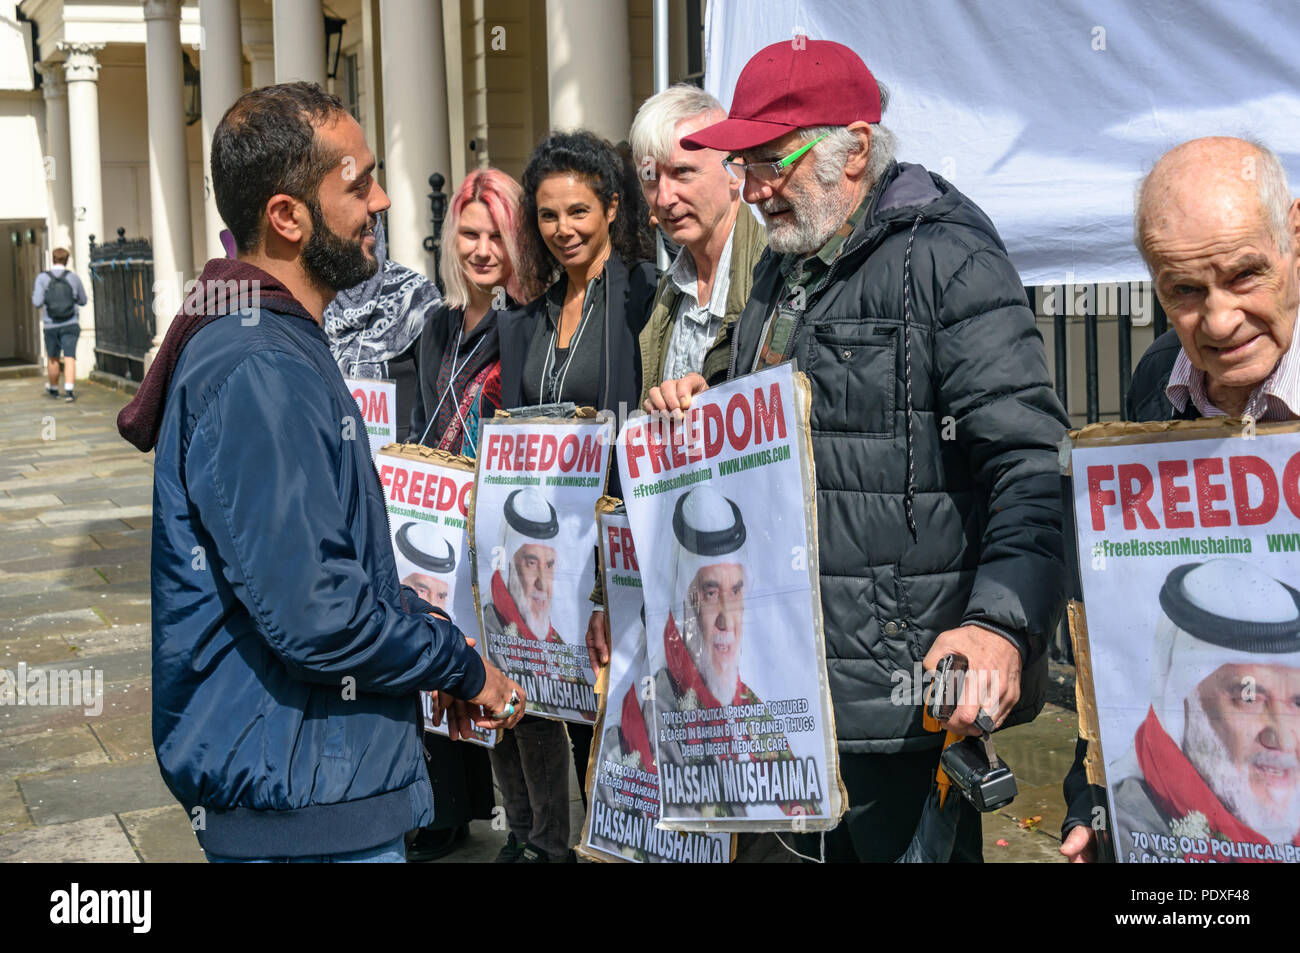 London, UK. 10th August 2018. Ali Mushaima (left) who has been on hunger strike at the Bahrain embassy since the start of August to save his fathers life speaks with campaigners at the vigil by Inminds Islamic human rights organisation vigil calling for the immediate release of Hassan Mushaima and all the other 5000 Bahraini prisoners of conscience languishing in the Al-Khalifa regimes jails. They also demanded the British government end its complicity in the Al Khalifa dictatorship's crimes against the Bahraini people. Credit: Peter Marshall/Alamy Live News Stock Photo